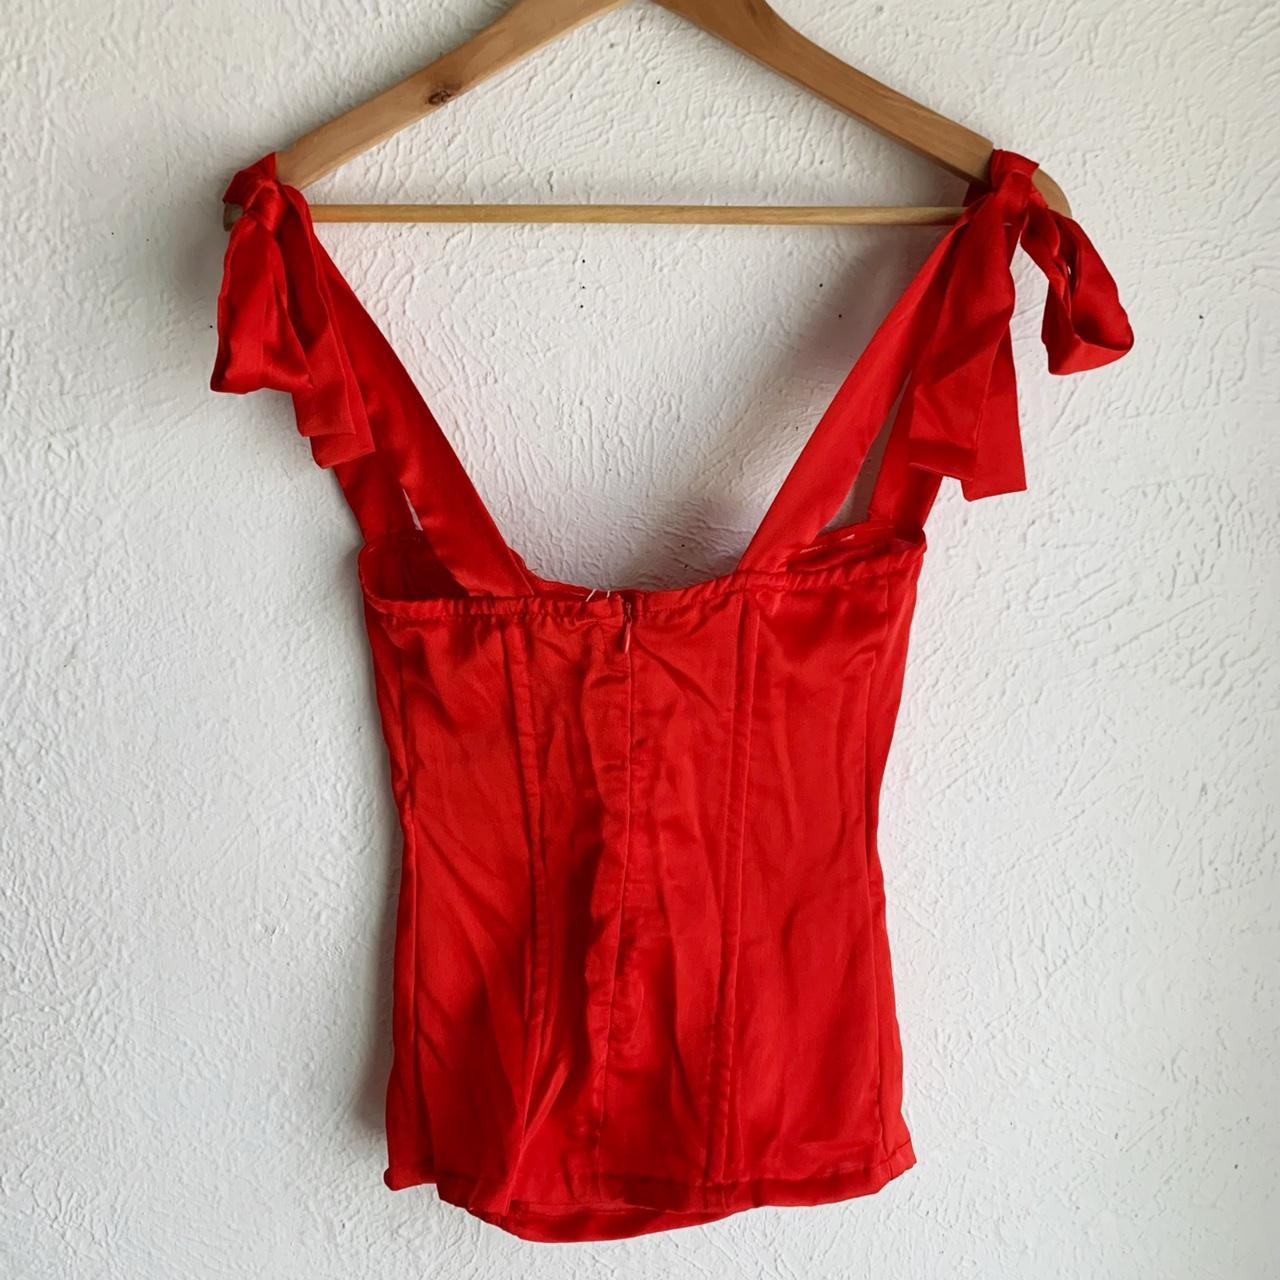 Lioness Women's Red Corset (3)